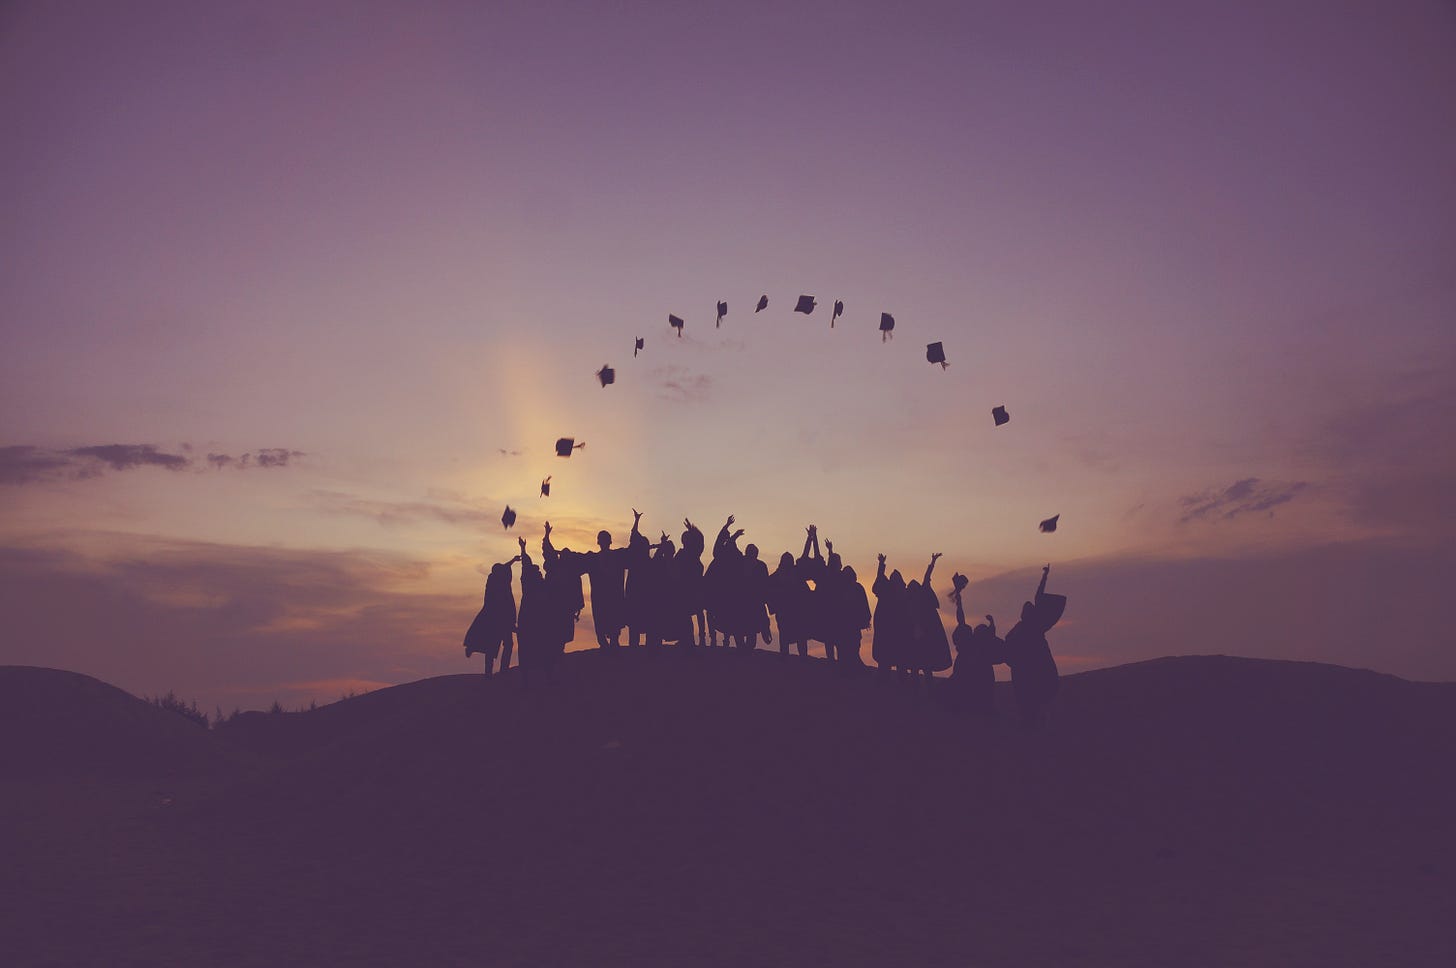 Silhouette of graduates throwing caps in the air. The caps, which are black, form an arc set against the backdrop of a purplish-yellow sky.